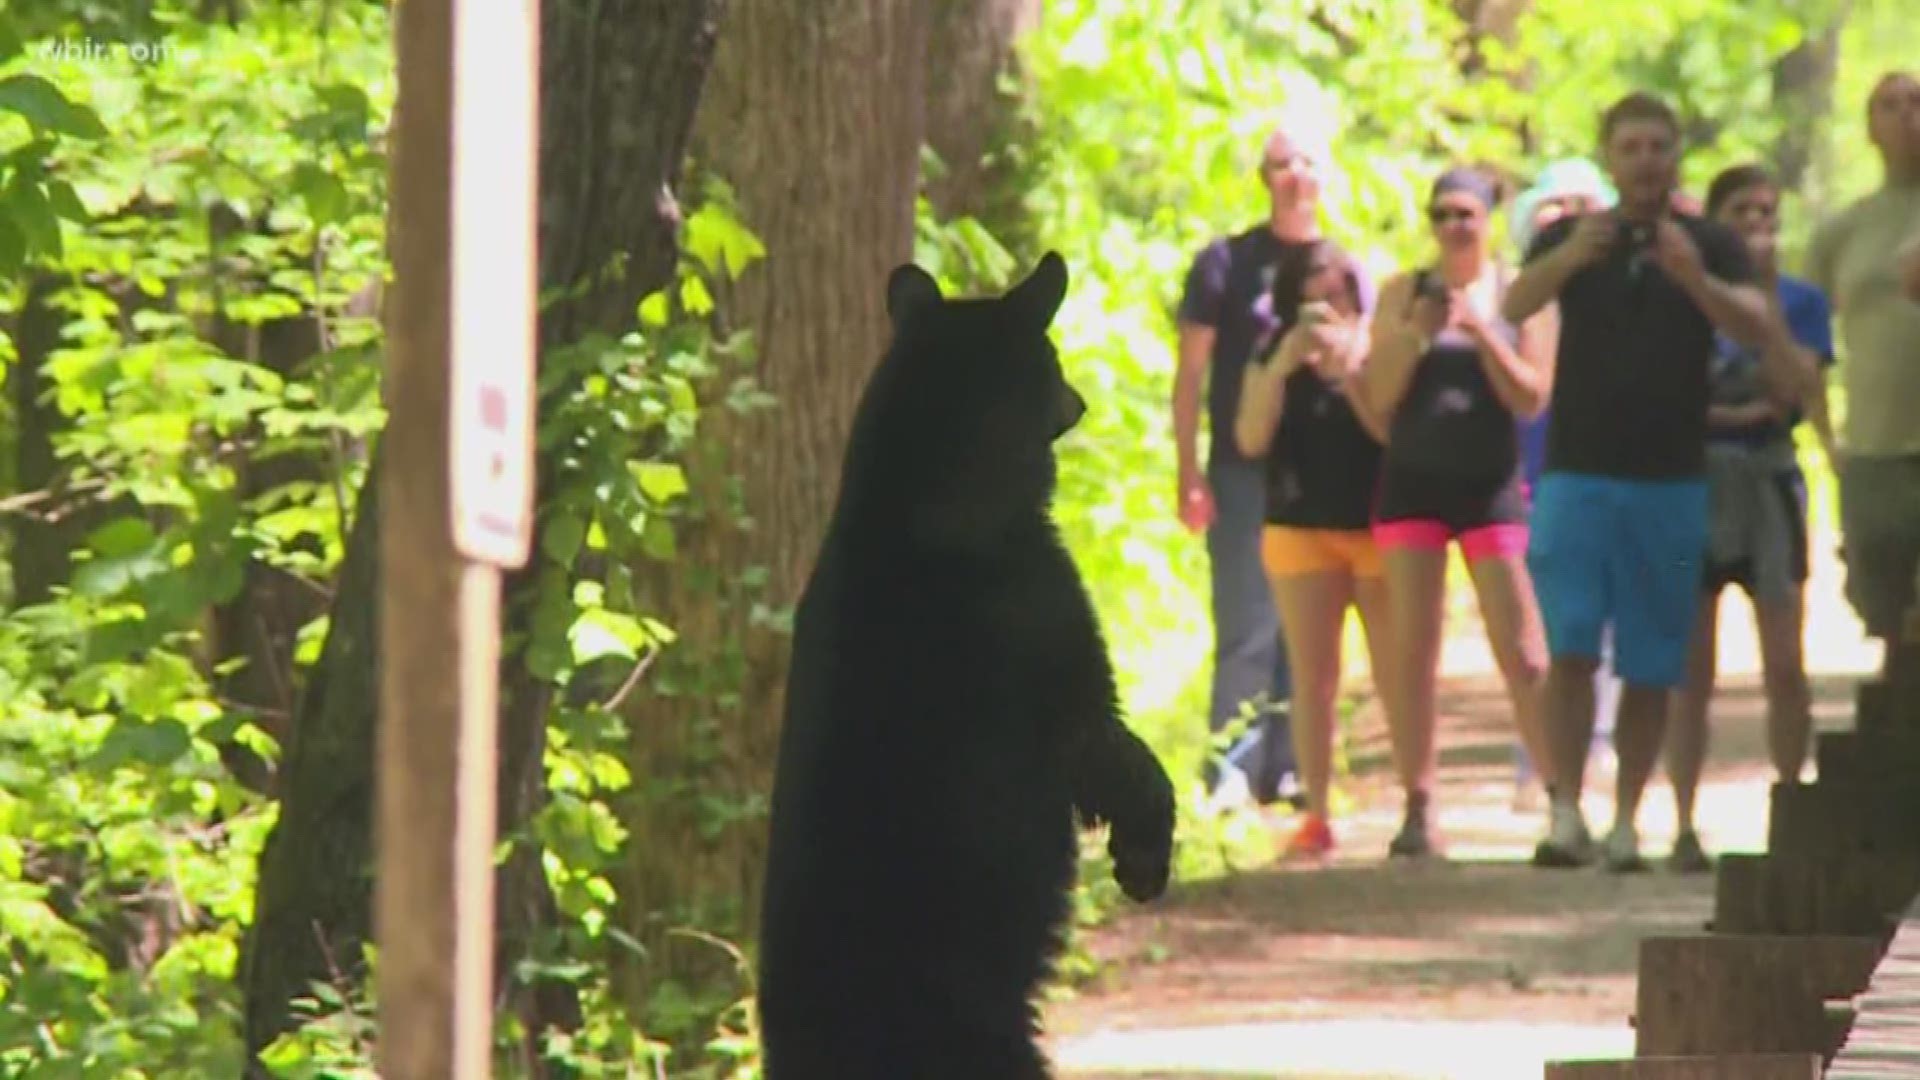 If you think you don't have to worry about bears at your home, a new study says you might need to think again.